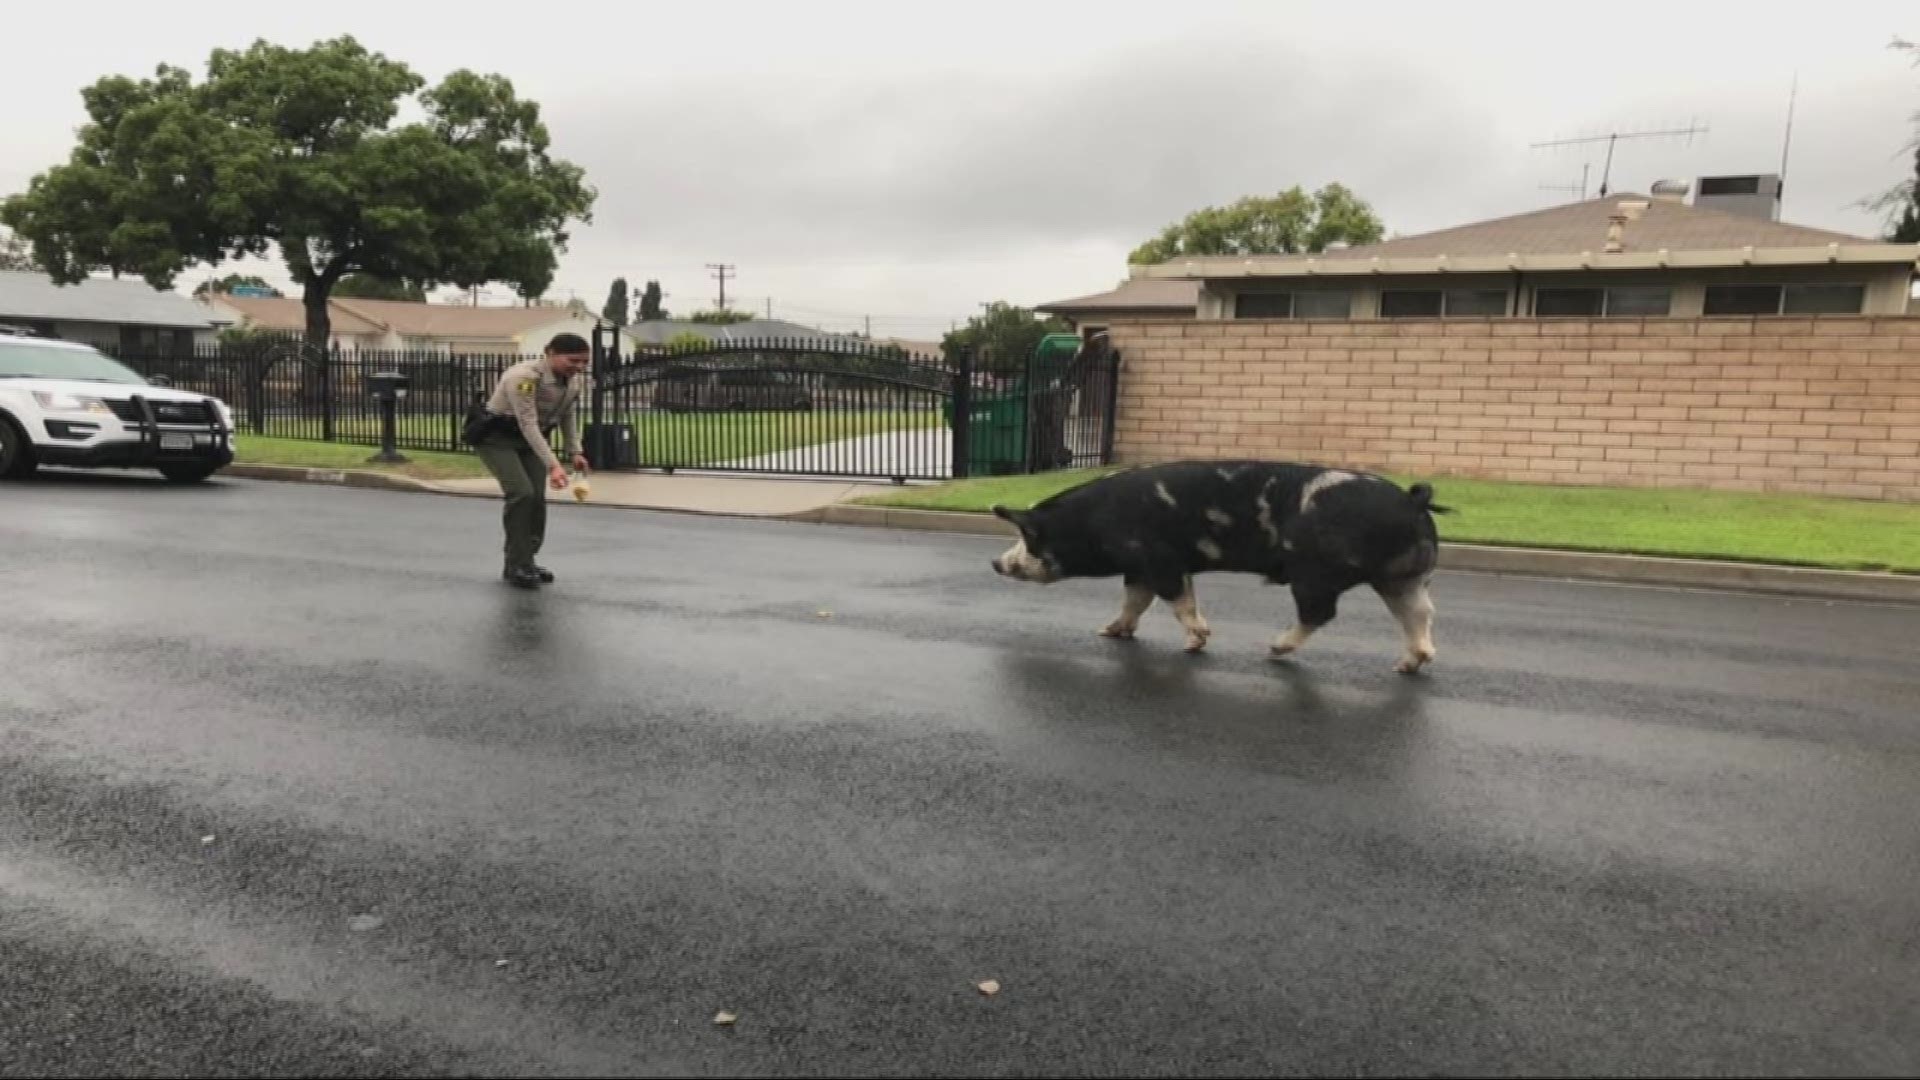 A California sheriff's deputy is going viral after using a bag of Doritos to lure a loose pig back home.